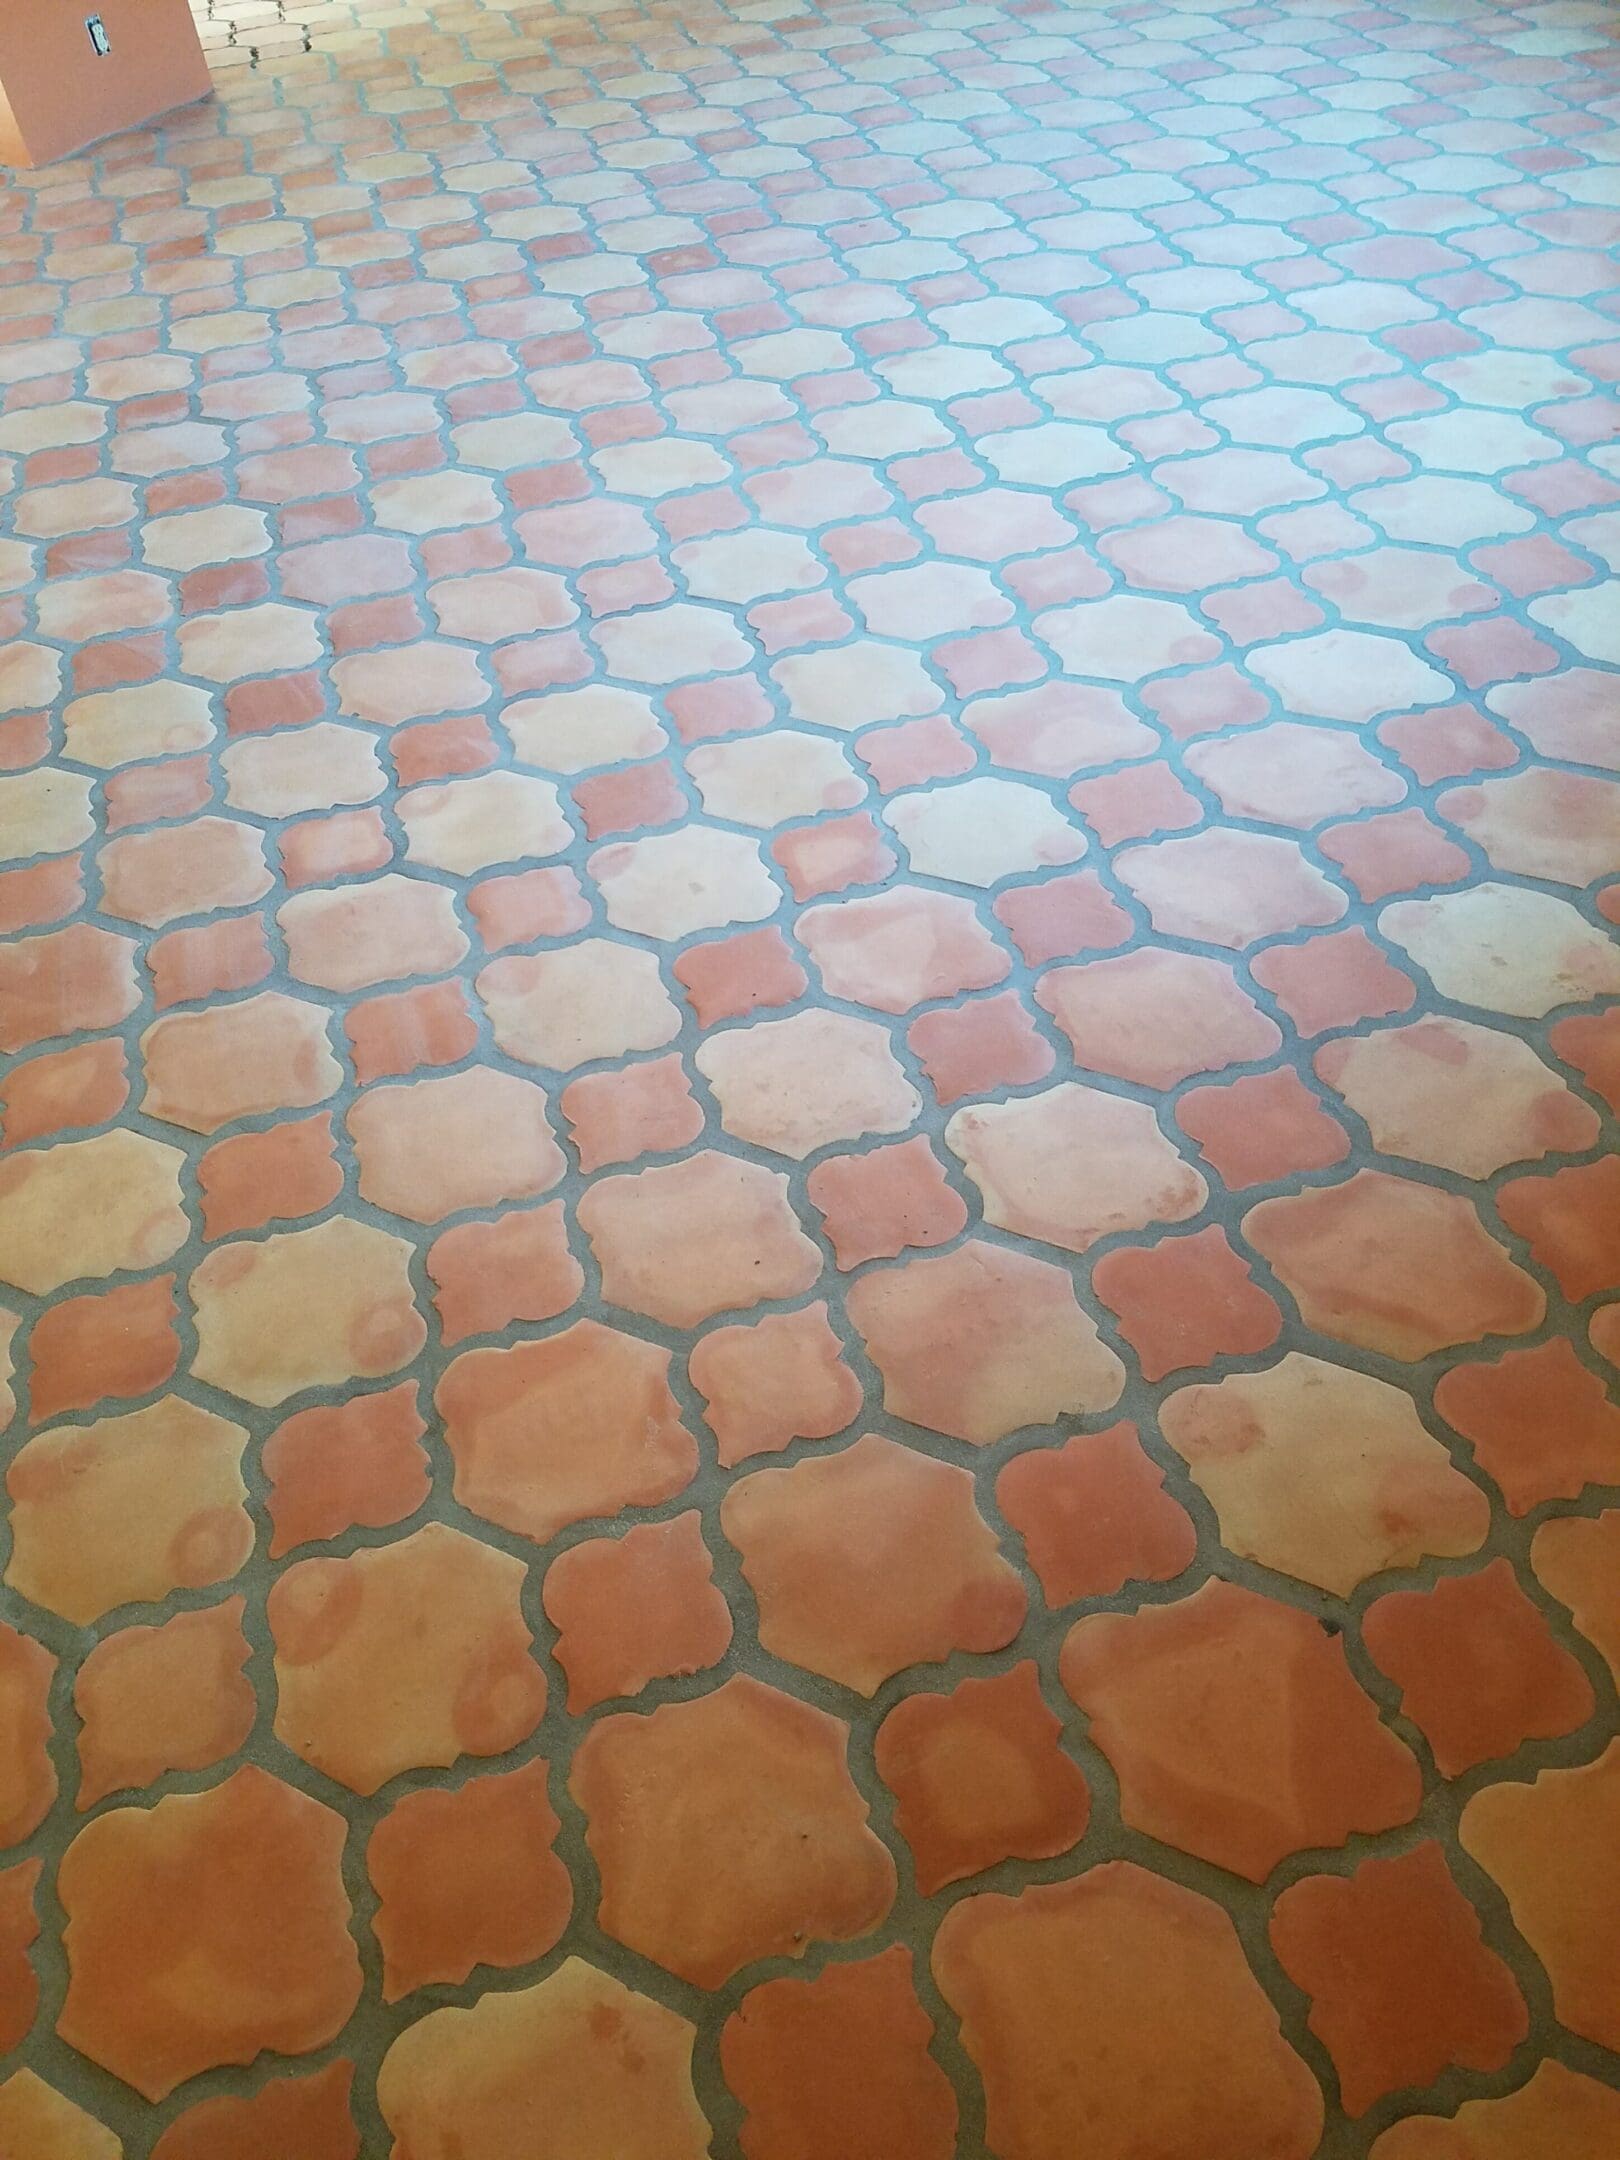 A floor with a pattern of orange and brown tiles.